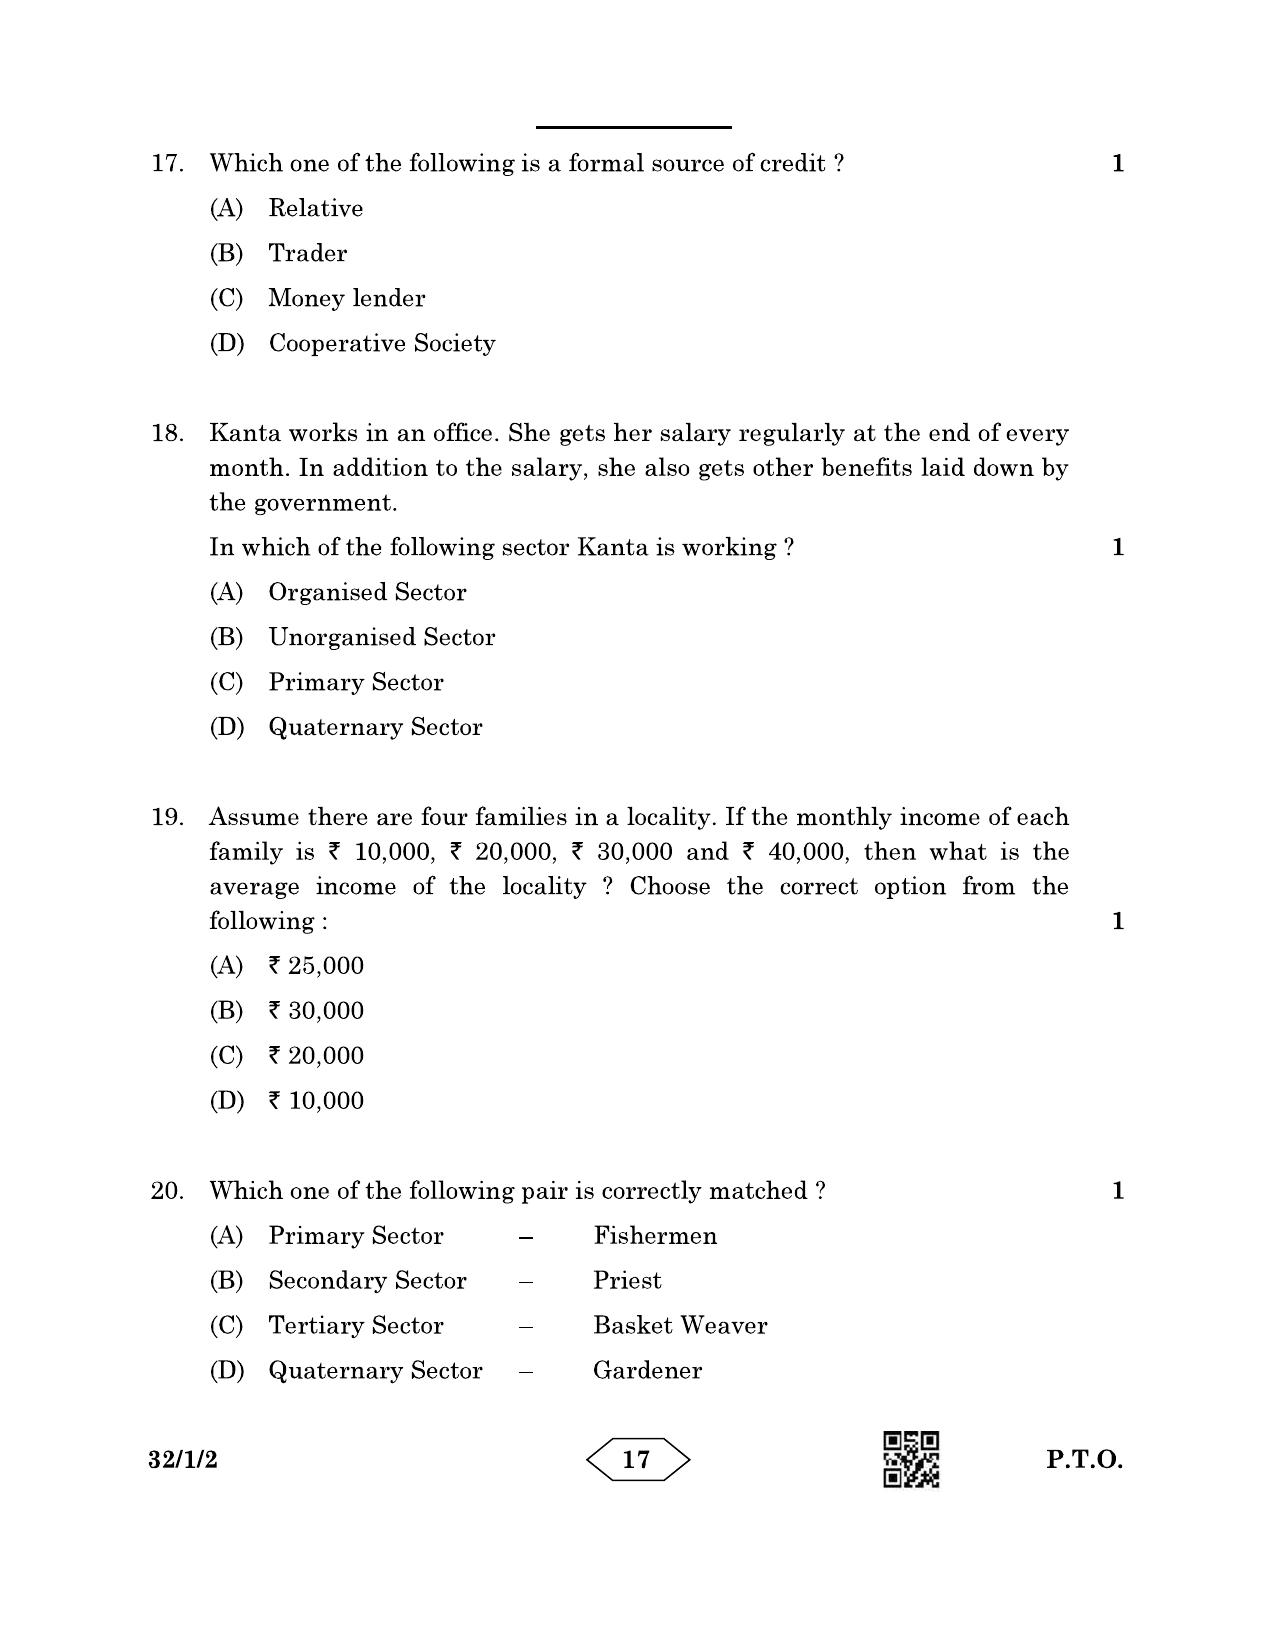 CBSE Class 10 32-1-2 Social Science 2023 Question Paper - Page 17